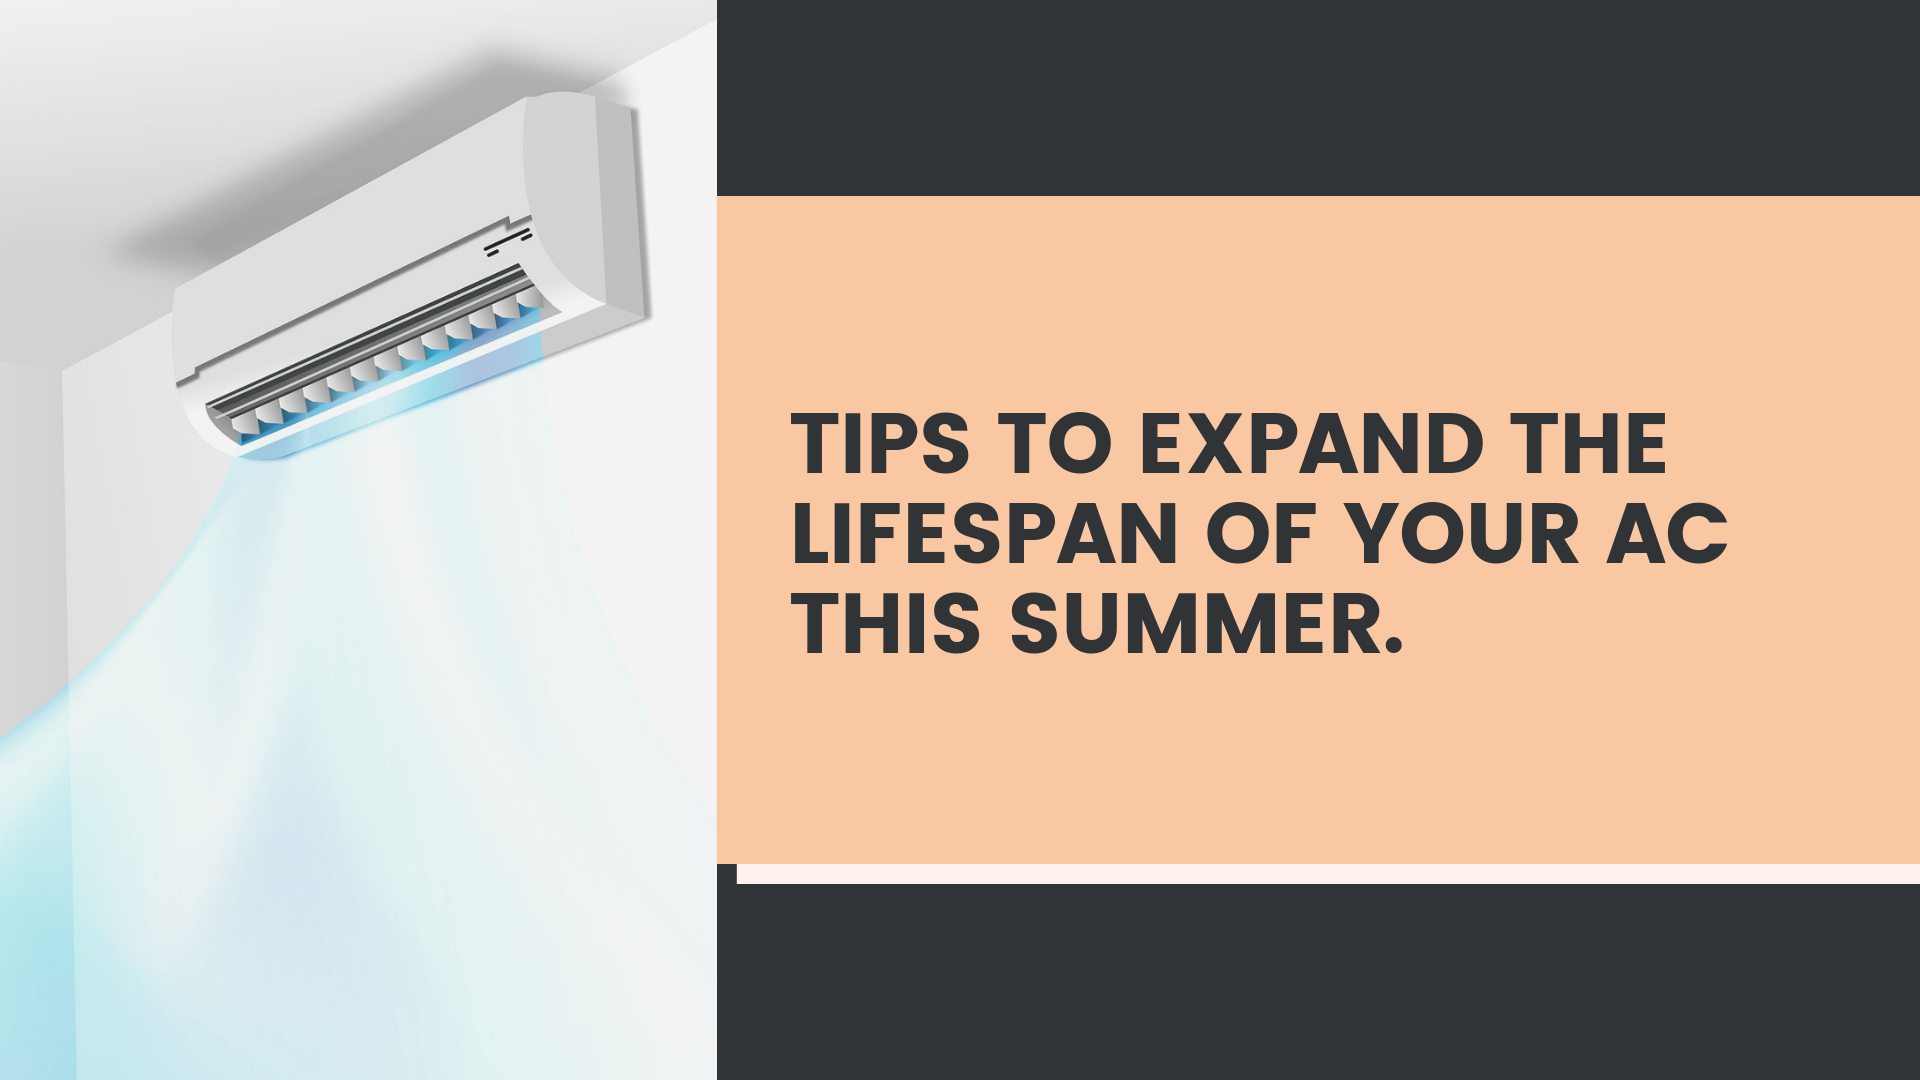 Tips To Expand the Lifespan of Your AC This Summer And Lower The Bills